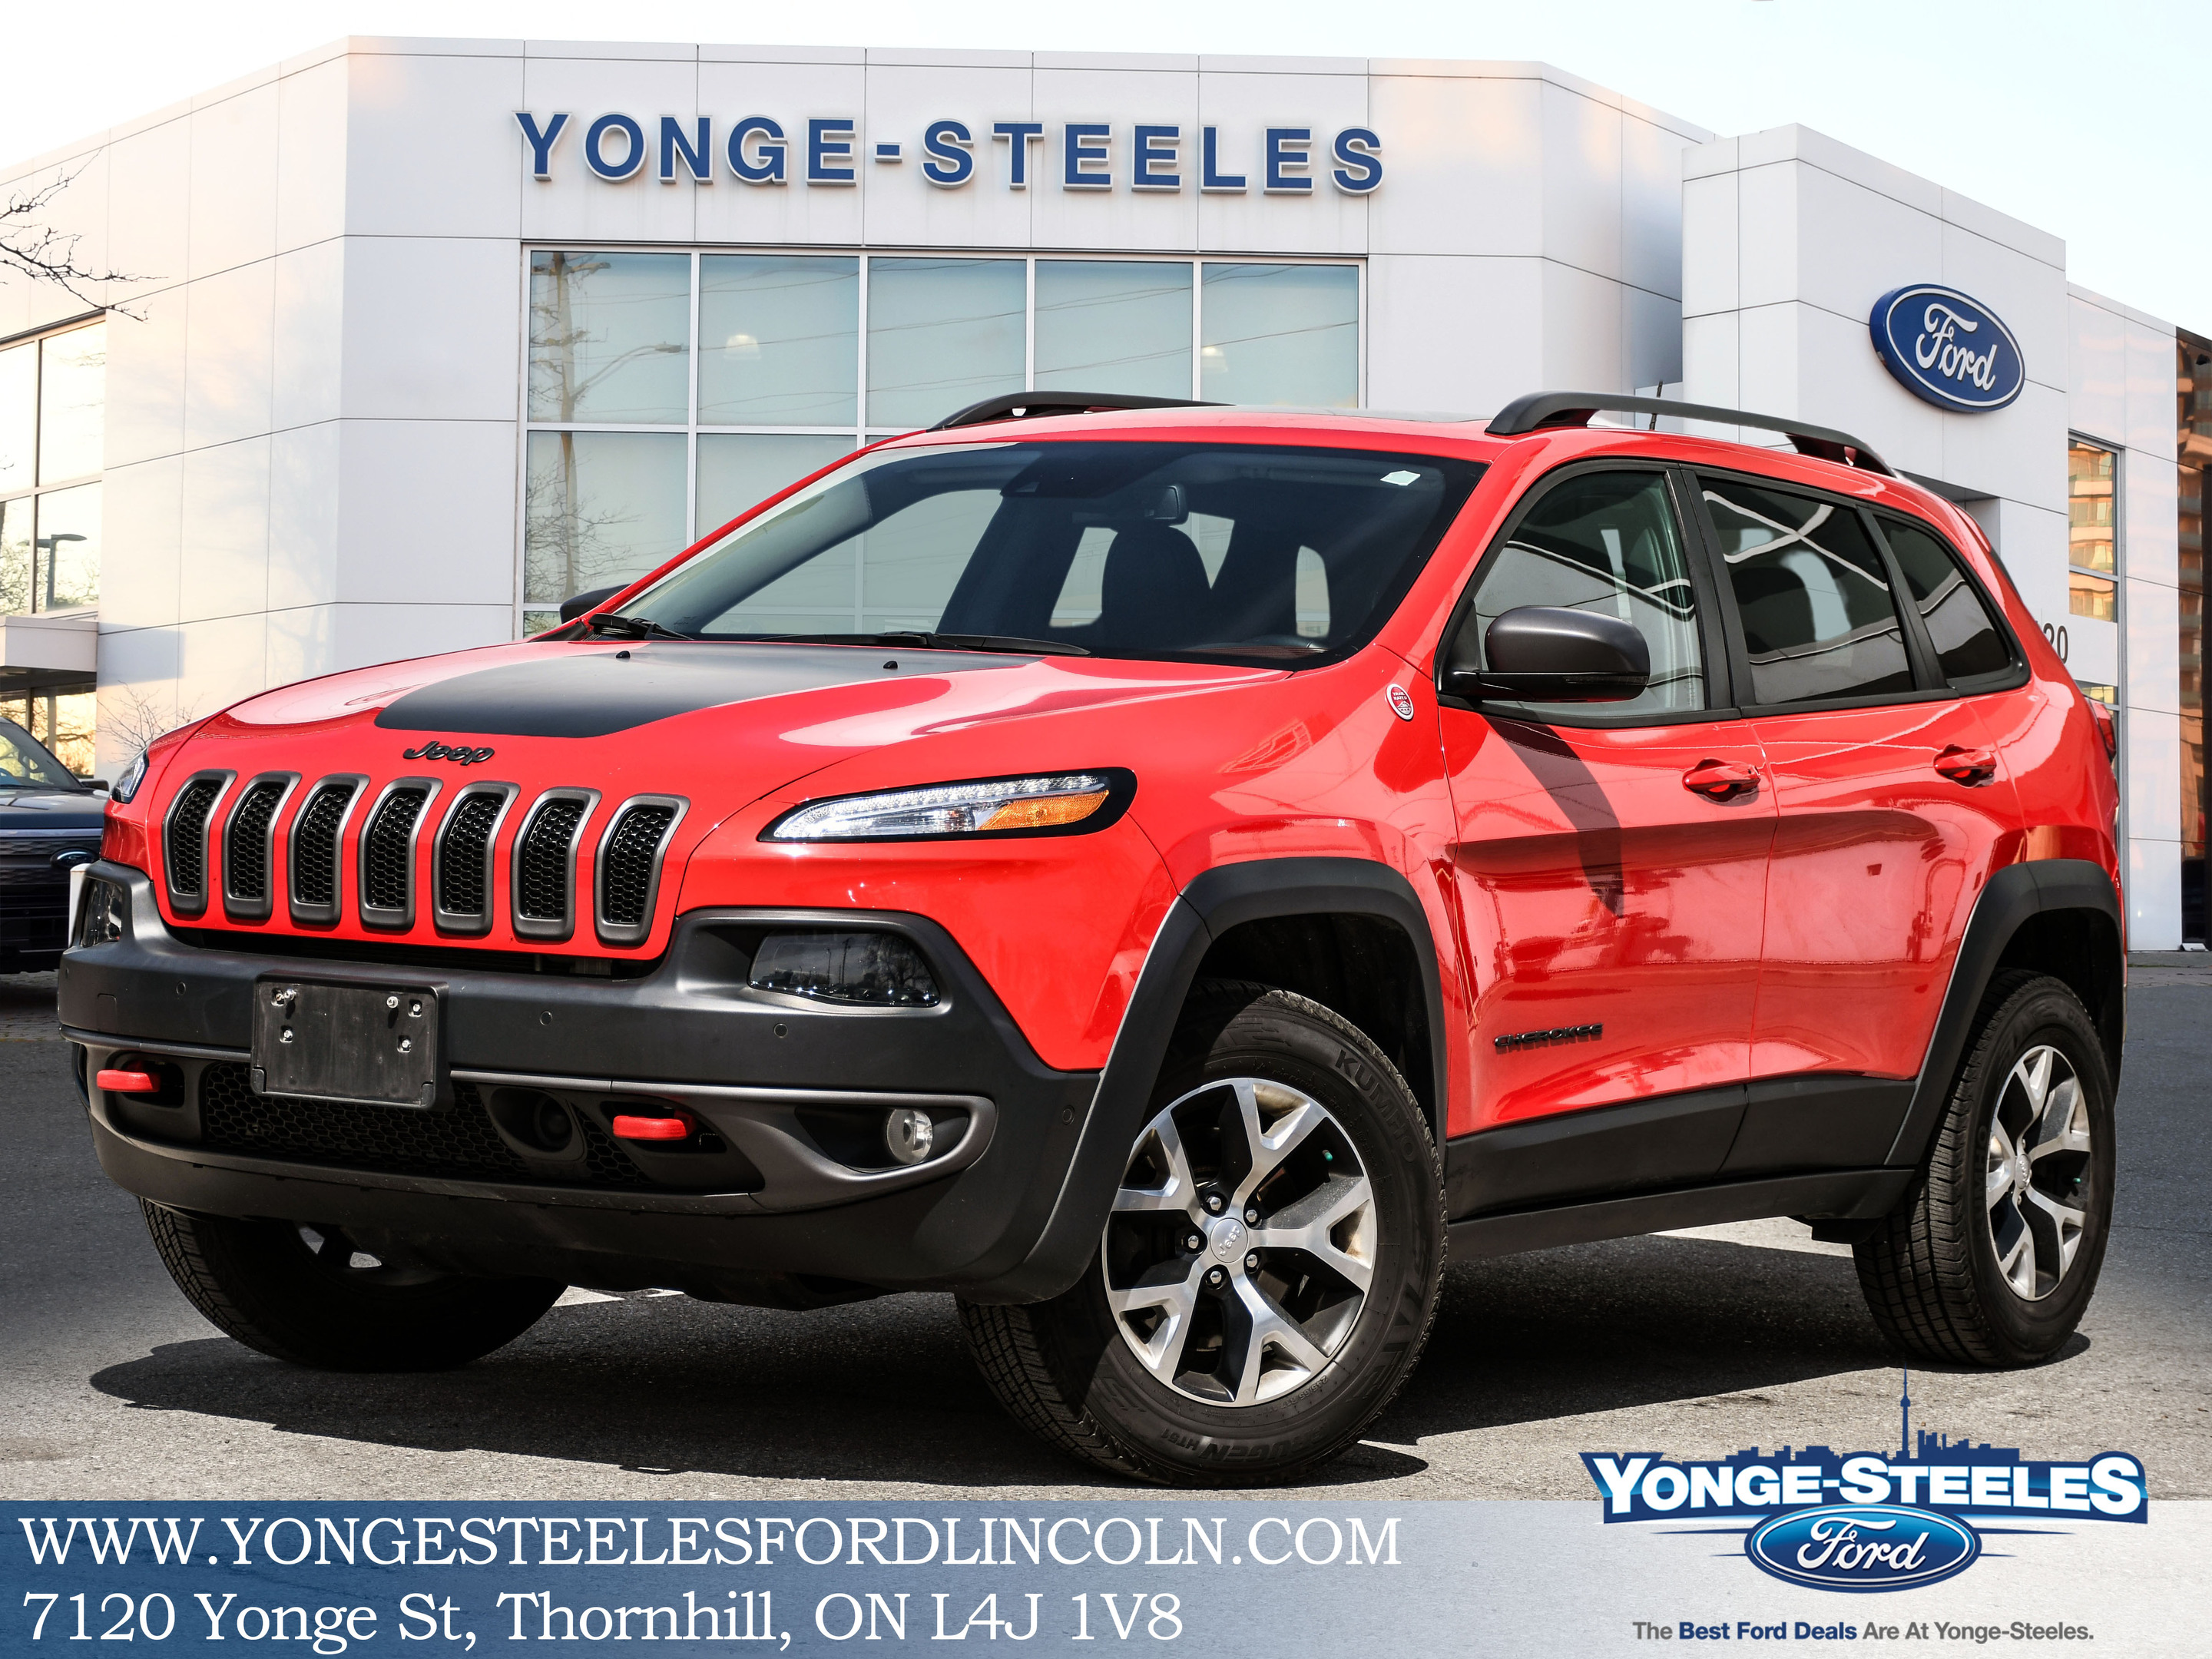 2018 Jeep Cherokee Trailhawk Leather Plus - One Owner - Accident Free